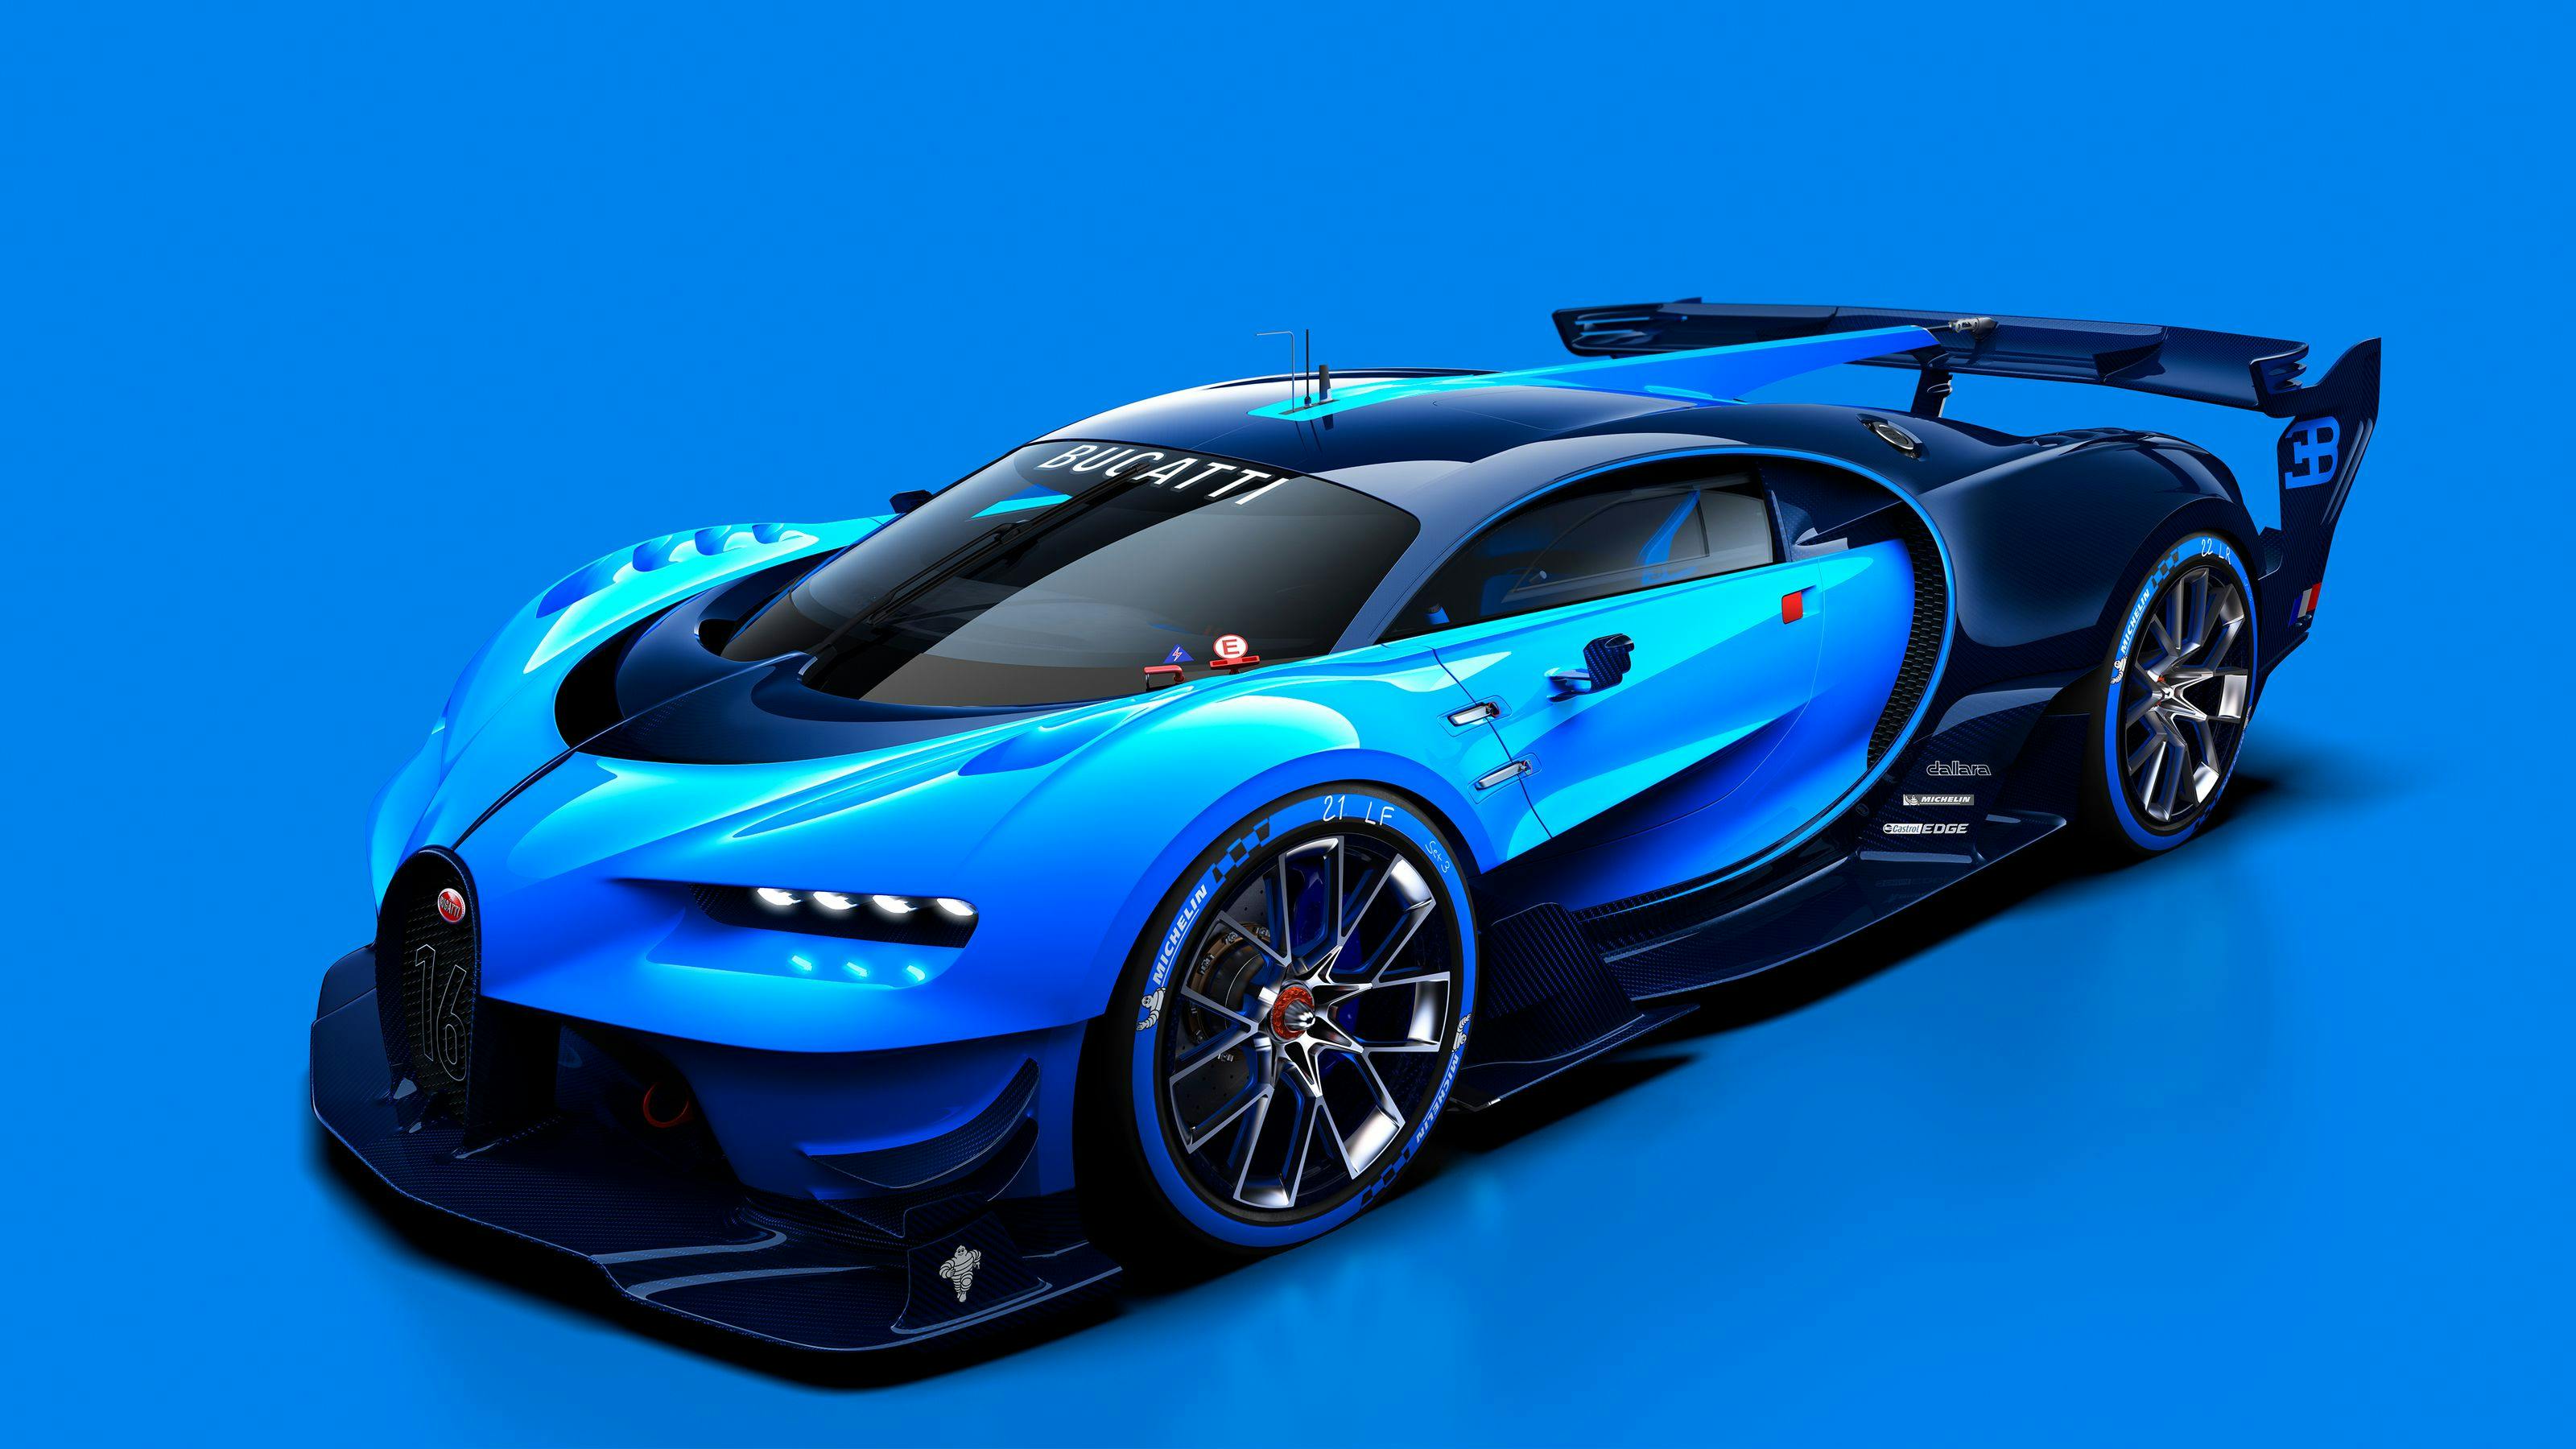 “This is for the fans: Bugatti Vision Gran Turismo” – Show car coming to Frankfurt Motor Show as world premiere